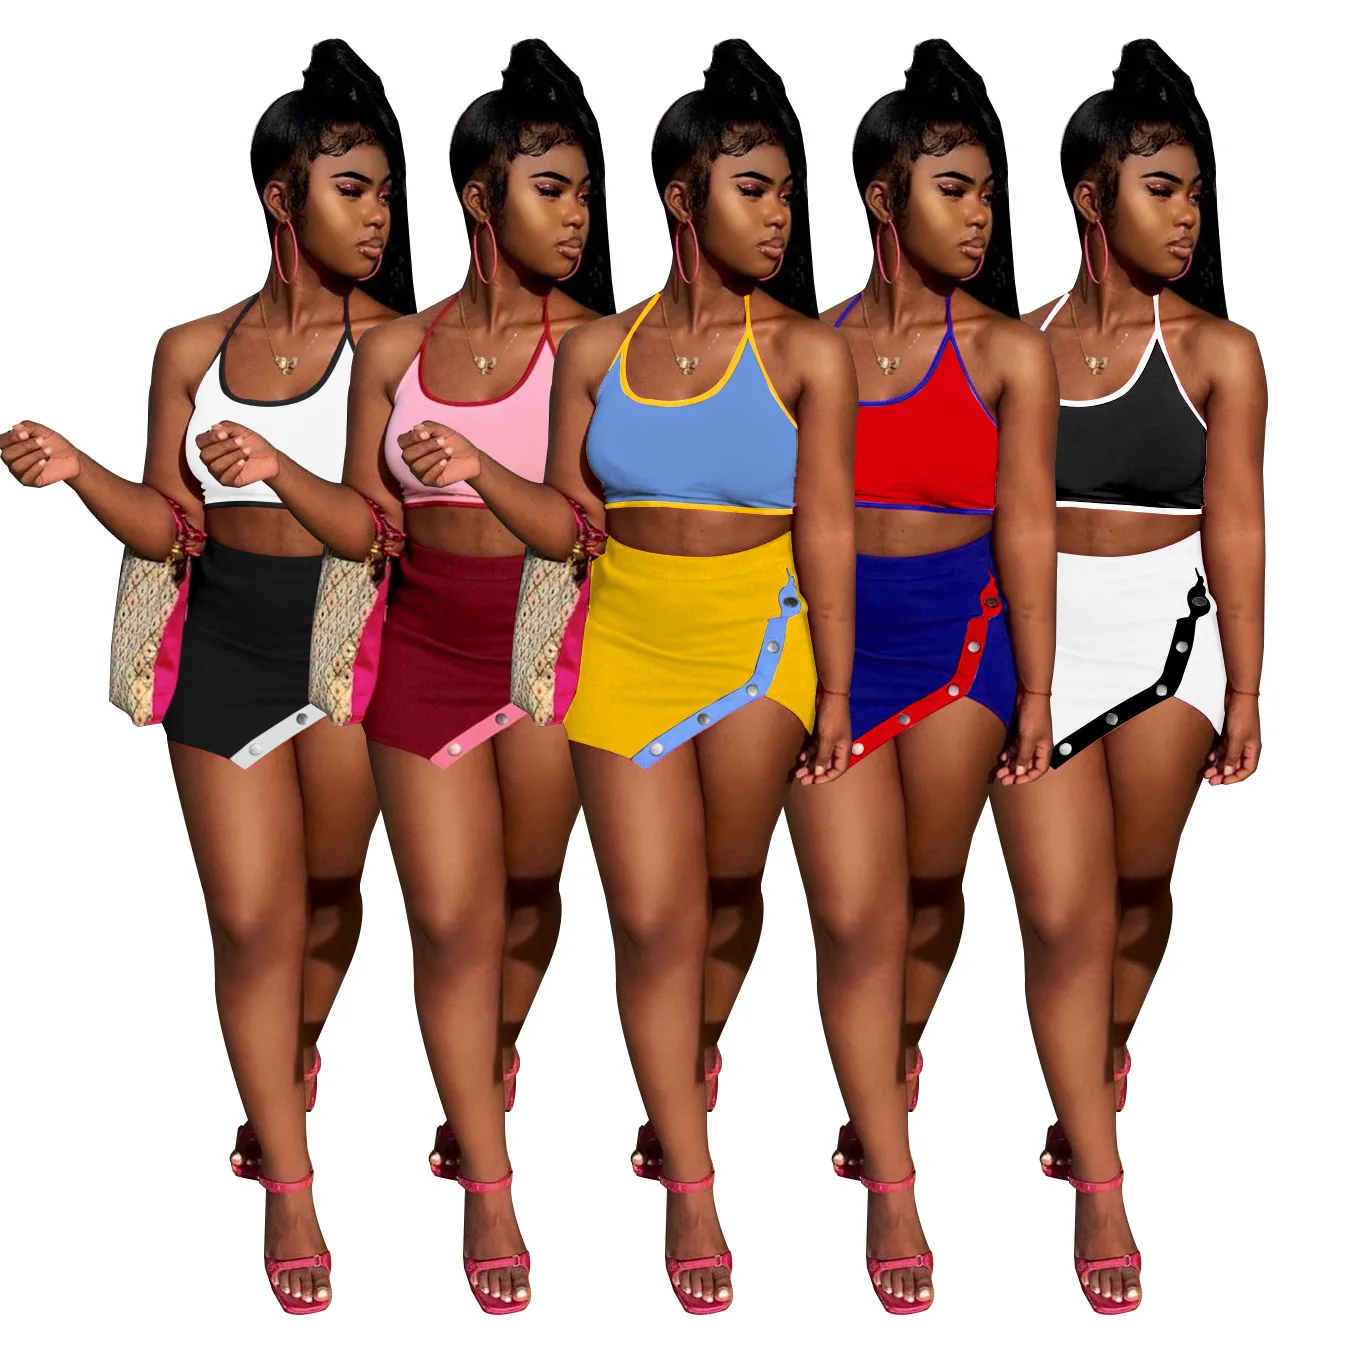 

New Arrival summer cute halter neon clothing crop top backless sexy buttons asymmetrical two piece set dress women skirt, As picture or customized make